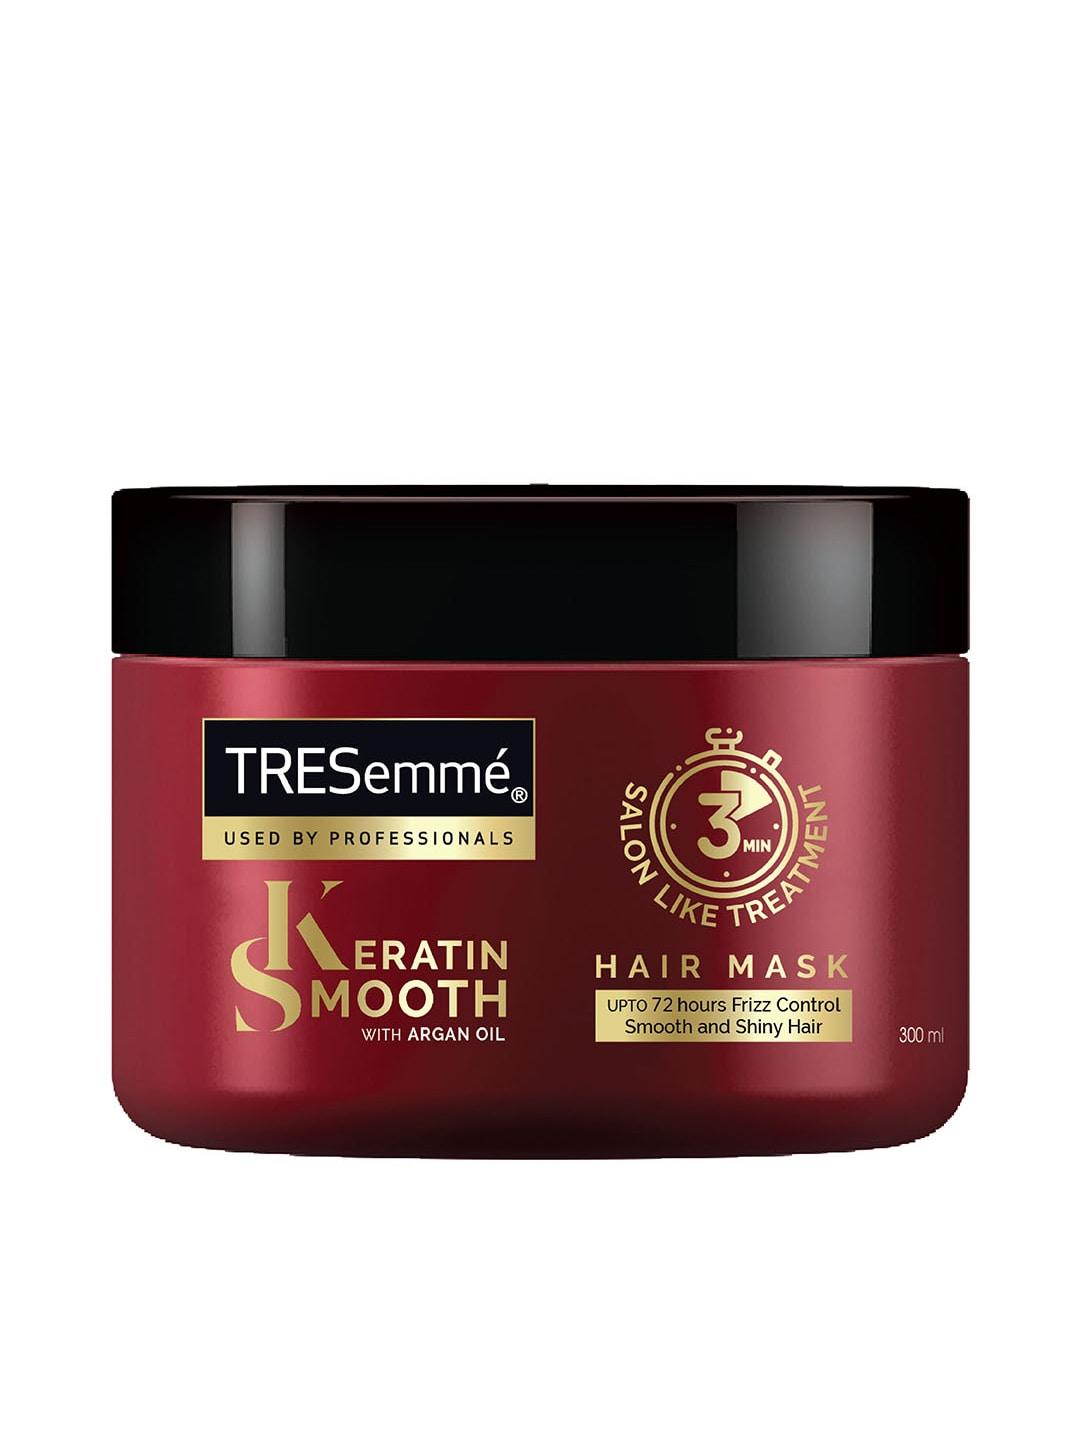 tresemme-keratin-smooth-deep-smoothing-mask-with-argan-oil---300ml